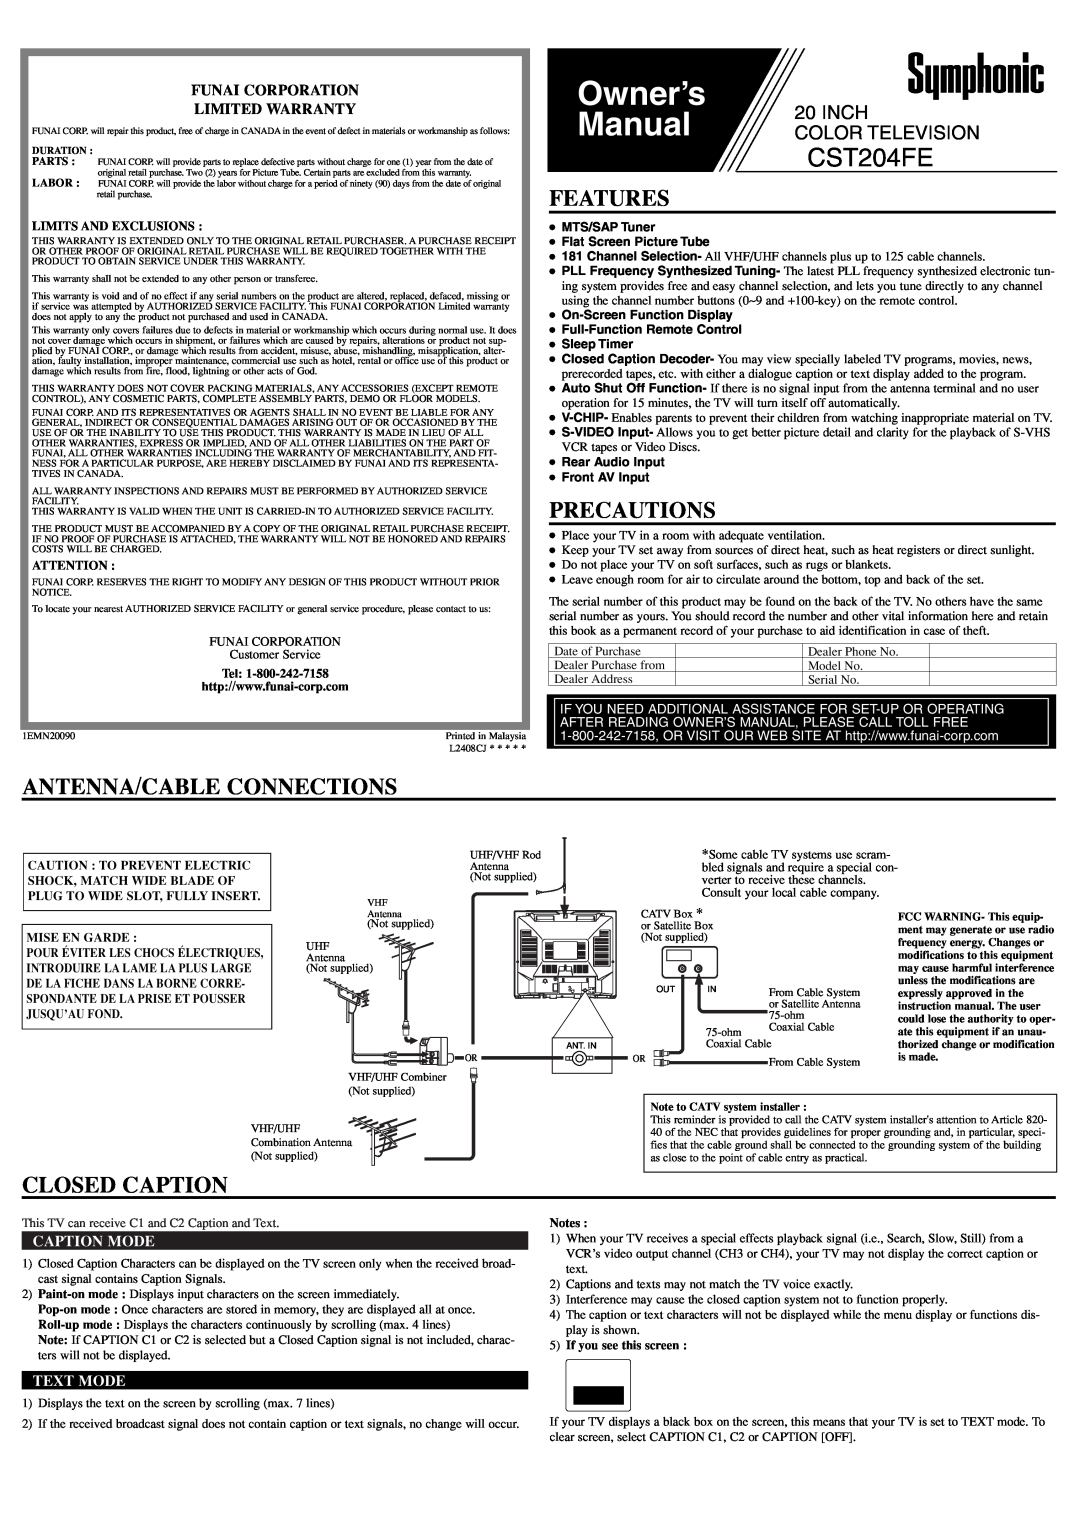 Symphonic CST204FE owner manual Features, Precautions, Antenna/Cable Connections, Closed Caption, Caption Mode, Text Mode 